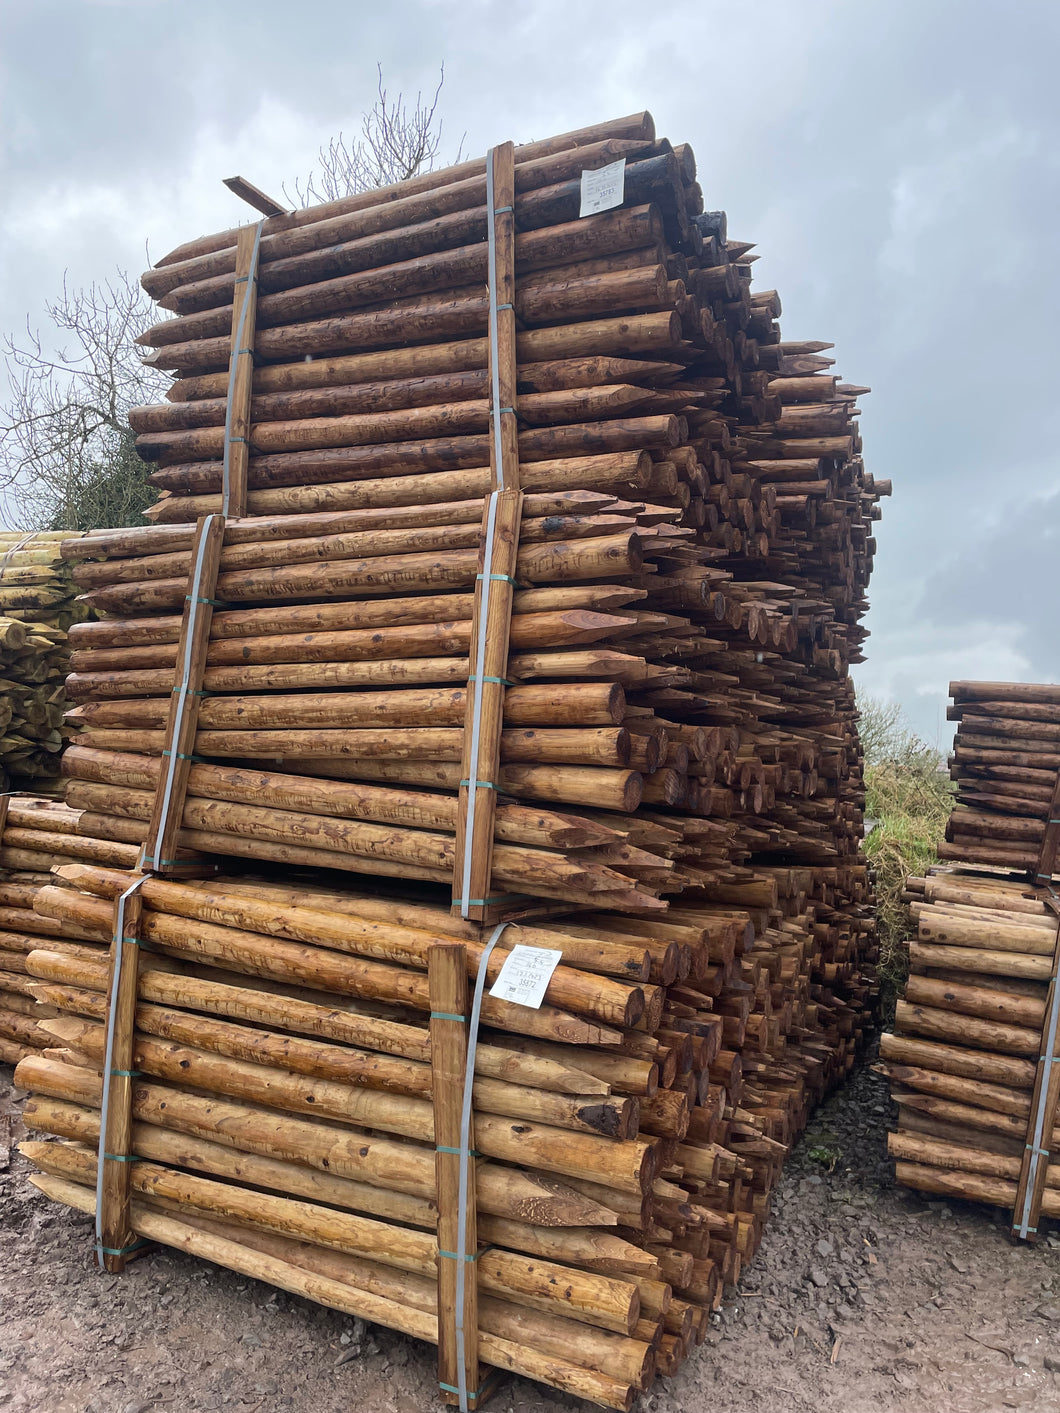 Wood Fab Fence Posts fencing posts from Leam Agri Ltd, Tempo, County Fermanagh, Northern Ireland. Serving Fermanagh, Tyrone, Antrim, Down, Londonderry, Armagh, Cavan, Leitrim, Sligo, Monaghan, Donegal, Dublin Carlow, Clare, Cork, Galway, Kerry, Kildare, Kilkenny, Laois, Limerick, Longford, Louth, Mayo, Meath, Monaghan, Offaly, Roscommon, Tipperary, Waterford, Westmeath, Wexford and Wicklow and throughout the United Kingdom, NI, ROI